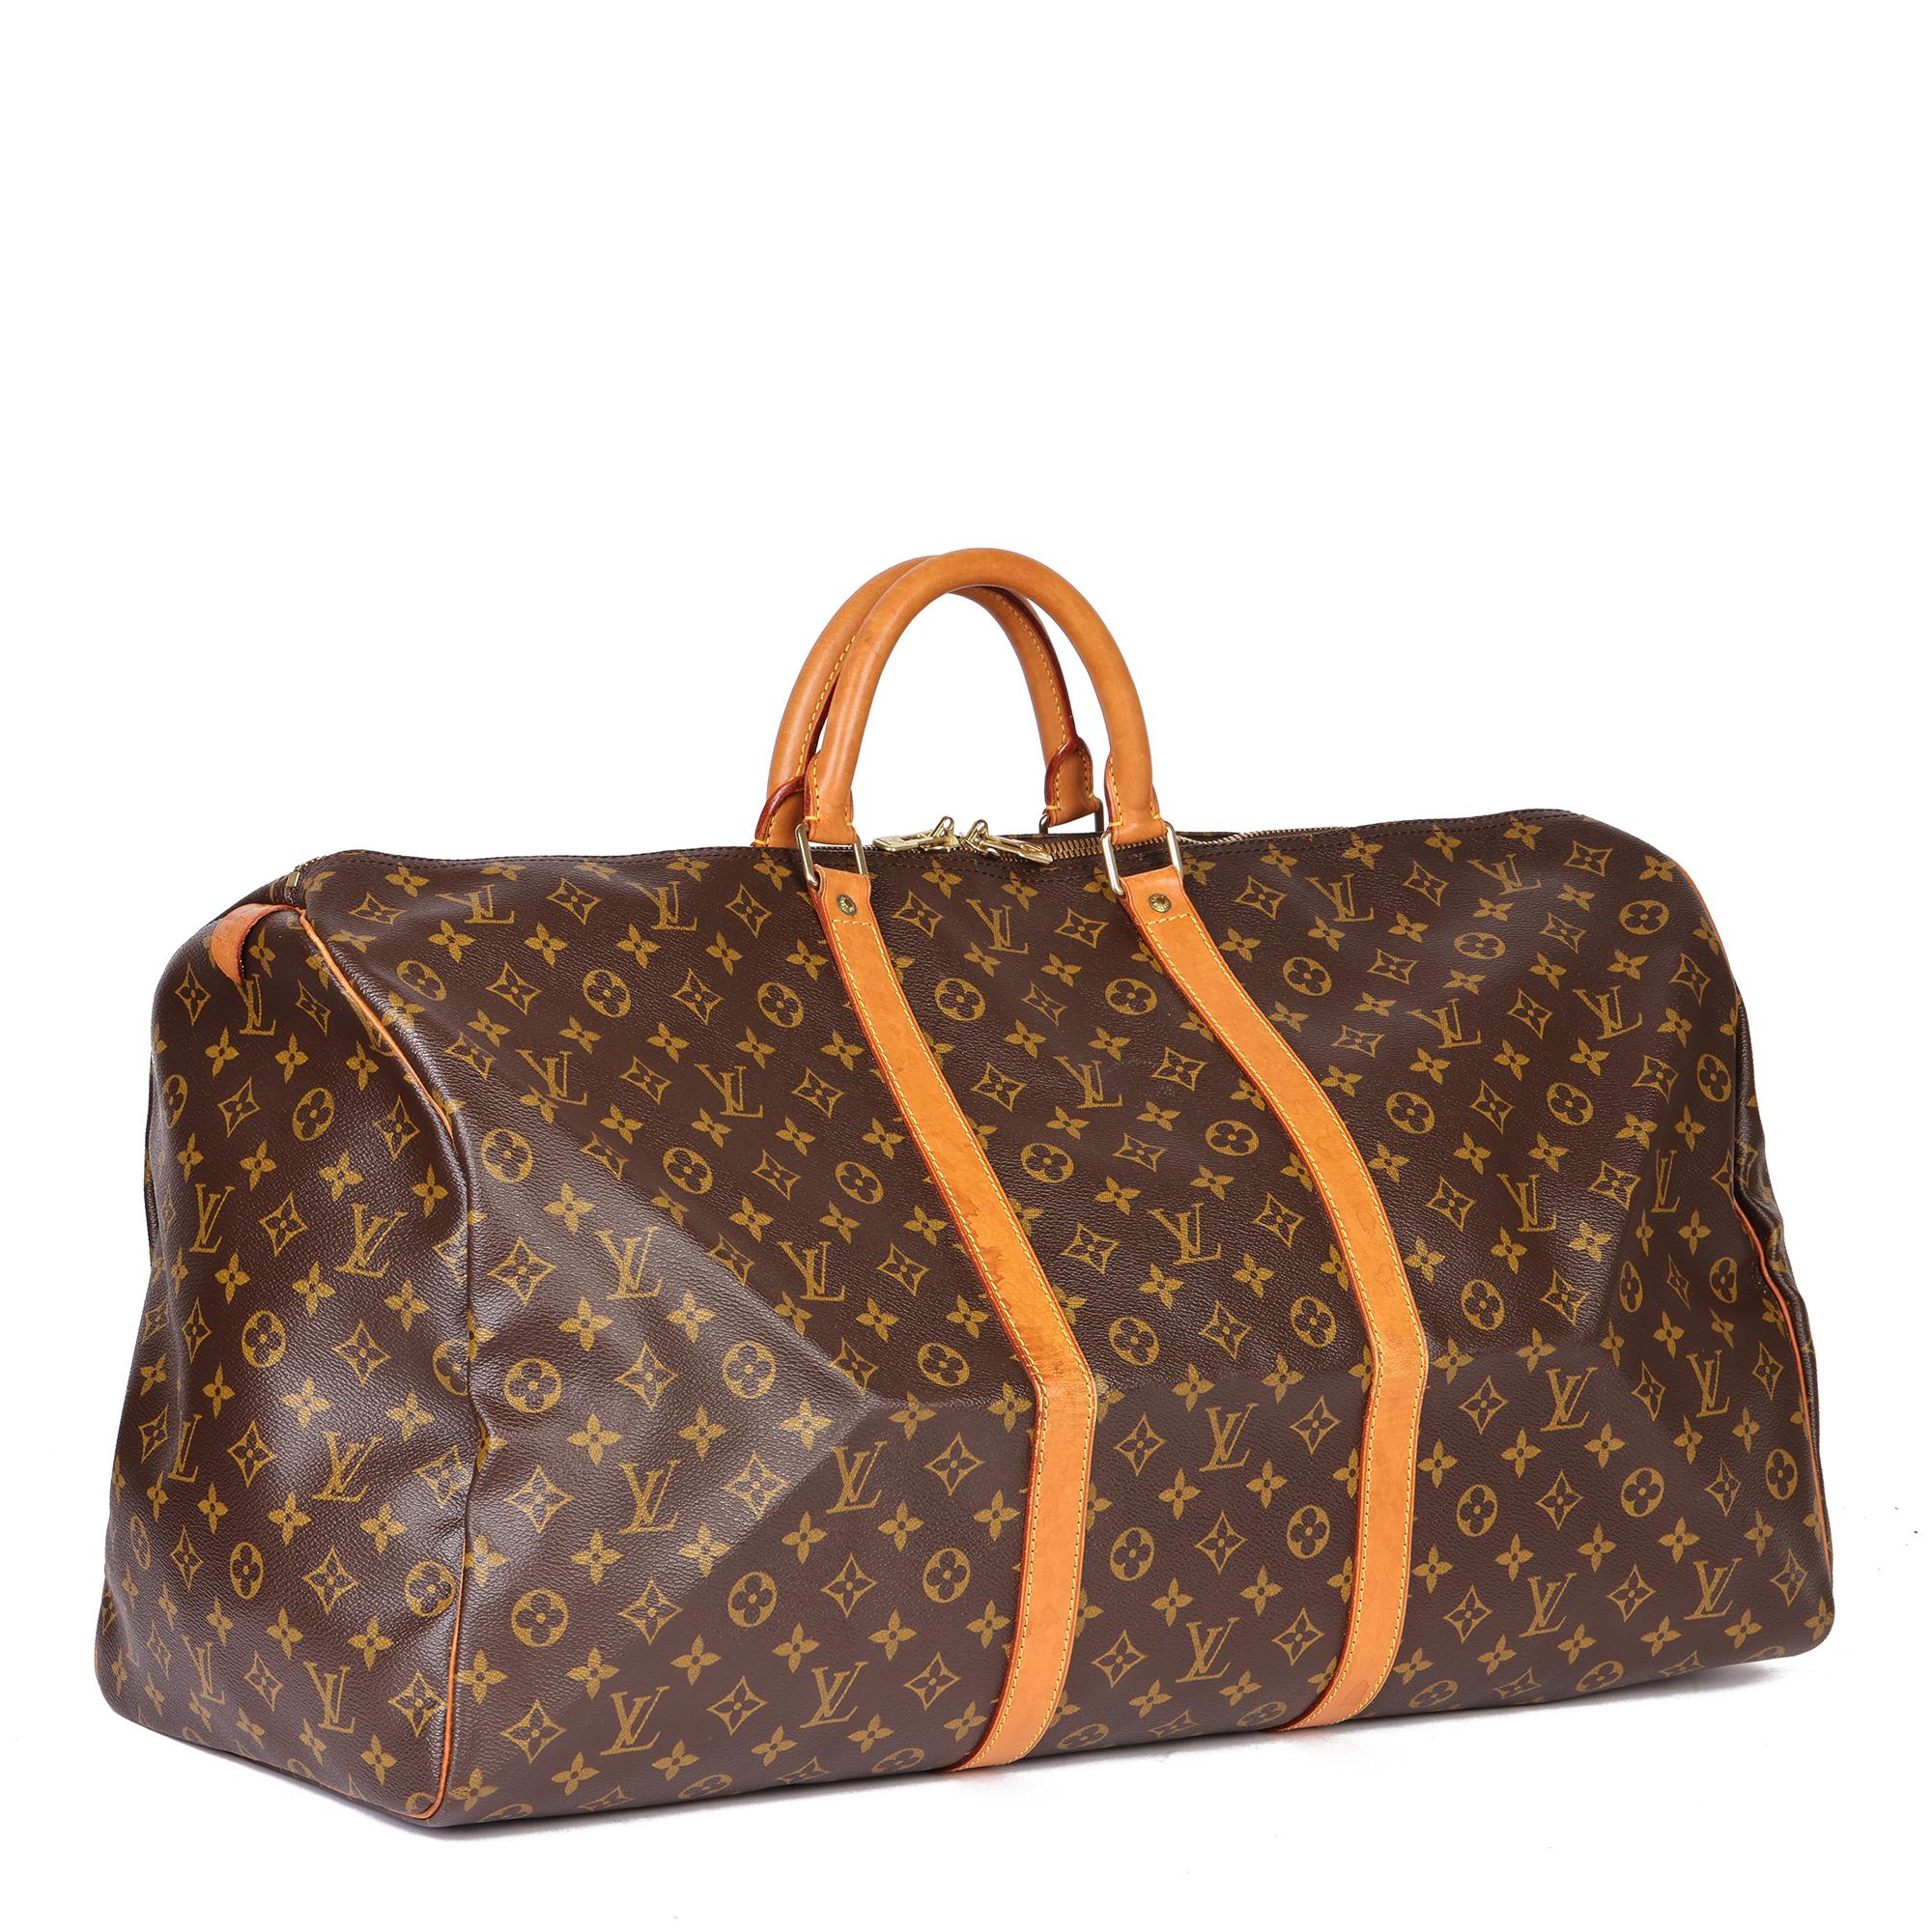 LOUIS VUITTON
Brown Monogram Coated Canvas & Vachetta Leather Vintage Keepall 50 

Serial Number: SP0955
Age (Circa): 1995
Accompanied By: Louis Vuitton Dust Bag
Authenticity Details: Date Stamp (Made in France)
Gender: Ladies
Type: Travel

Colour: